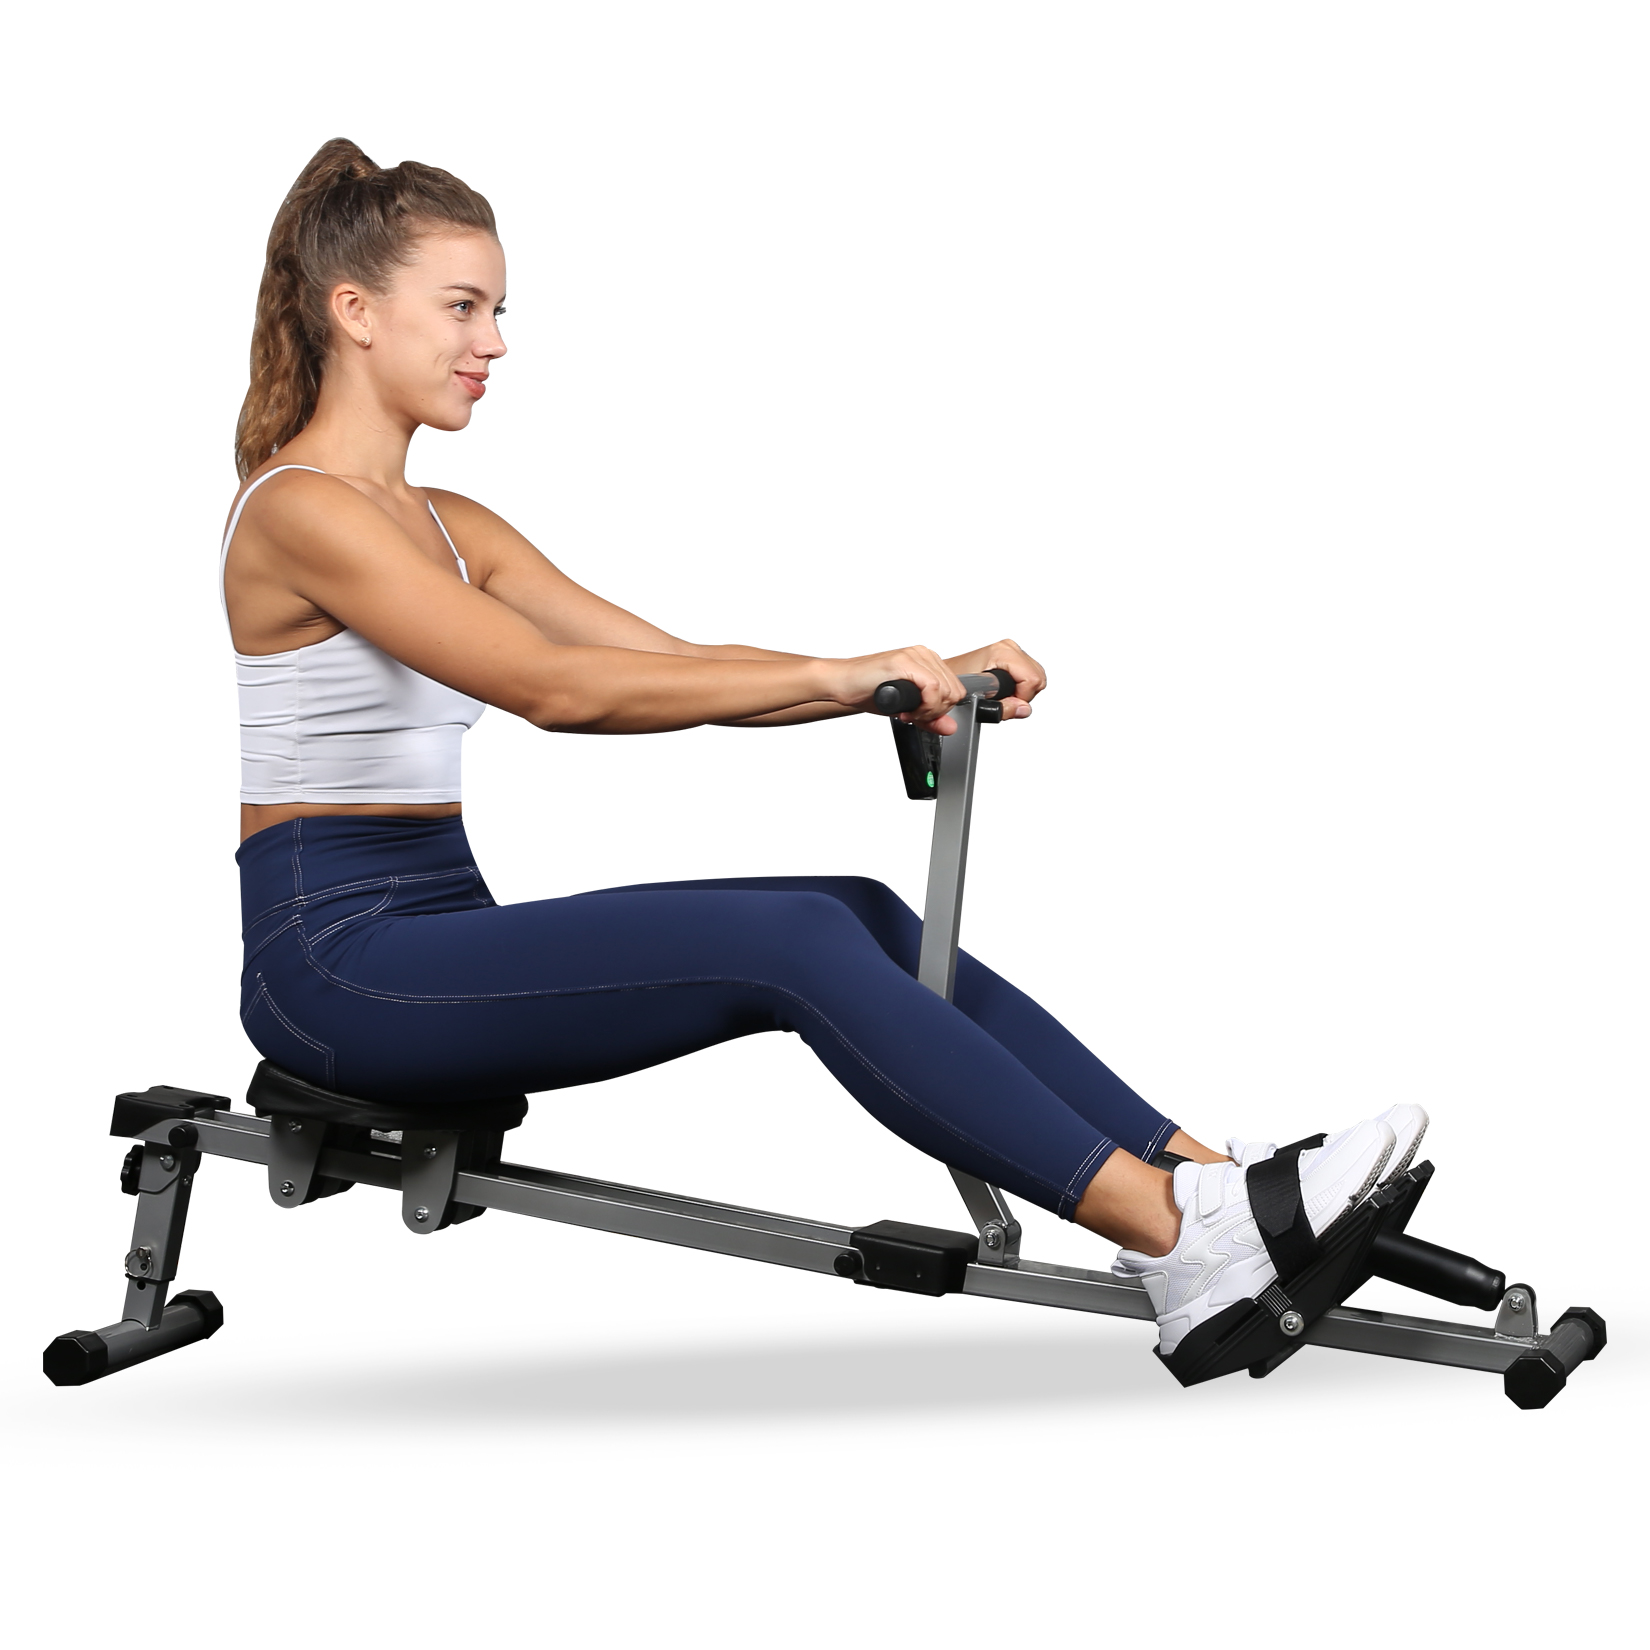 YSSOA Fitness Rowing Machine Rower Ergometer, with 12 Levels of Adjustable Resistance, Digital Monitor and 260 lbs of Maximum Load, Black-CASAINC